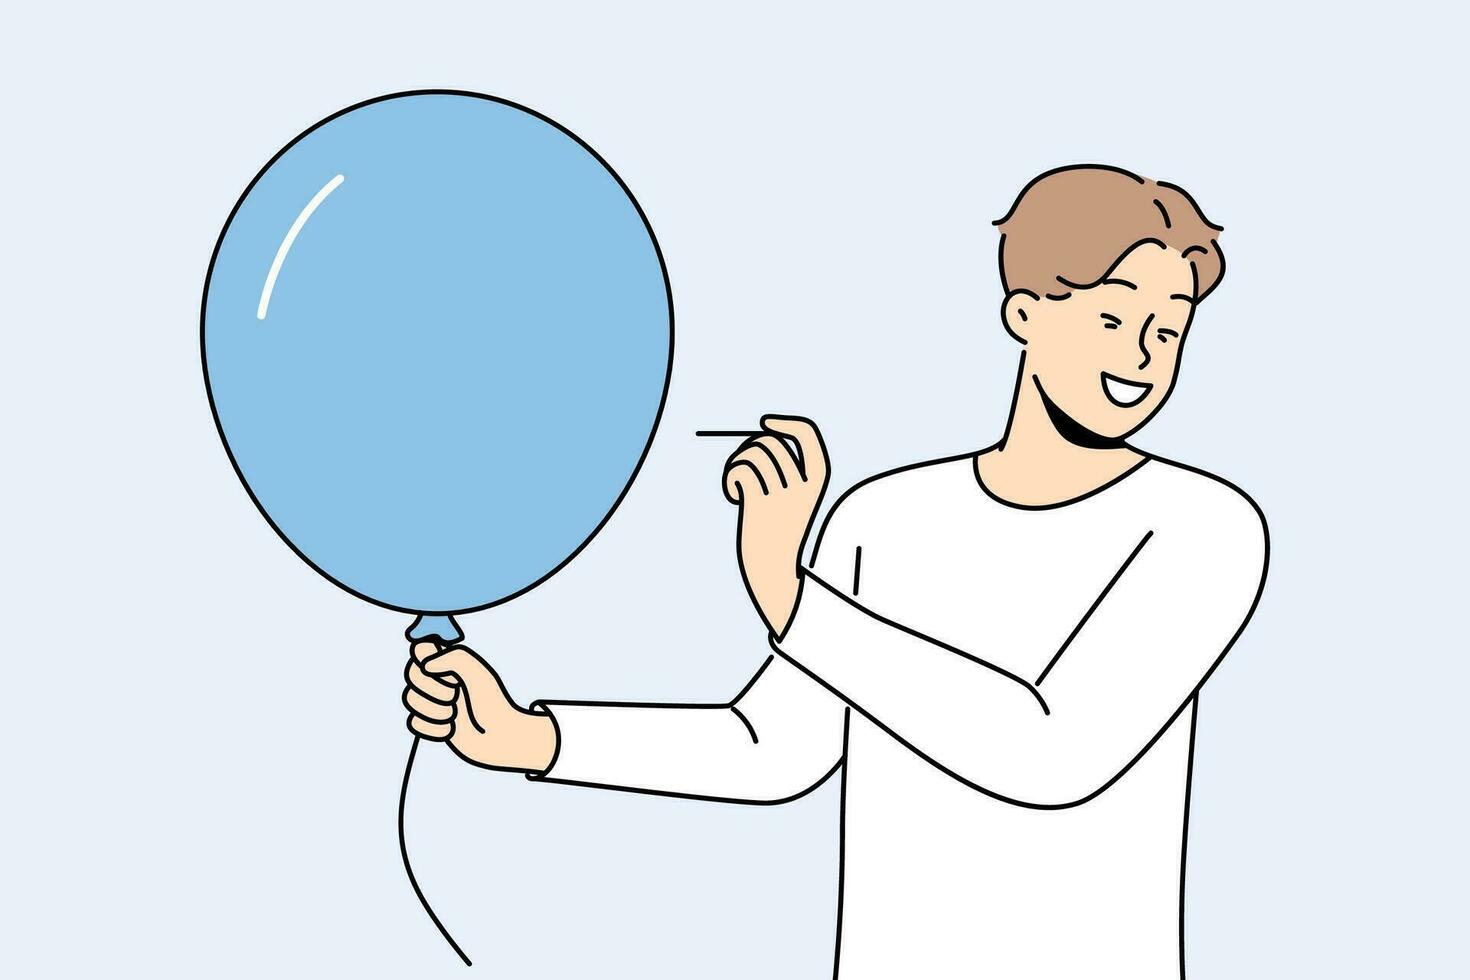 Man with balloon holds needle, wanting to make loud explosion to cheer people around. Happy guy dressed in casual style with blue balloon in hands makes prank to scare or amuse friends. vector